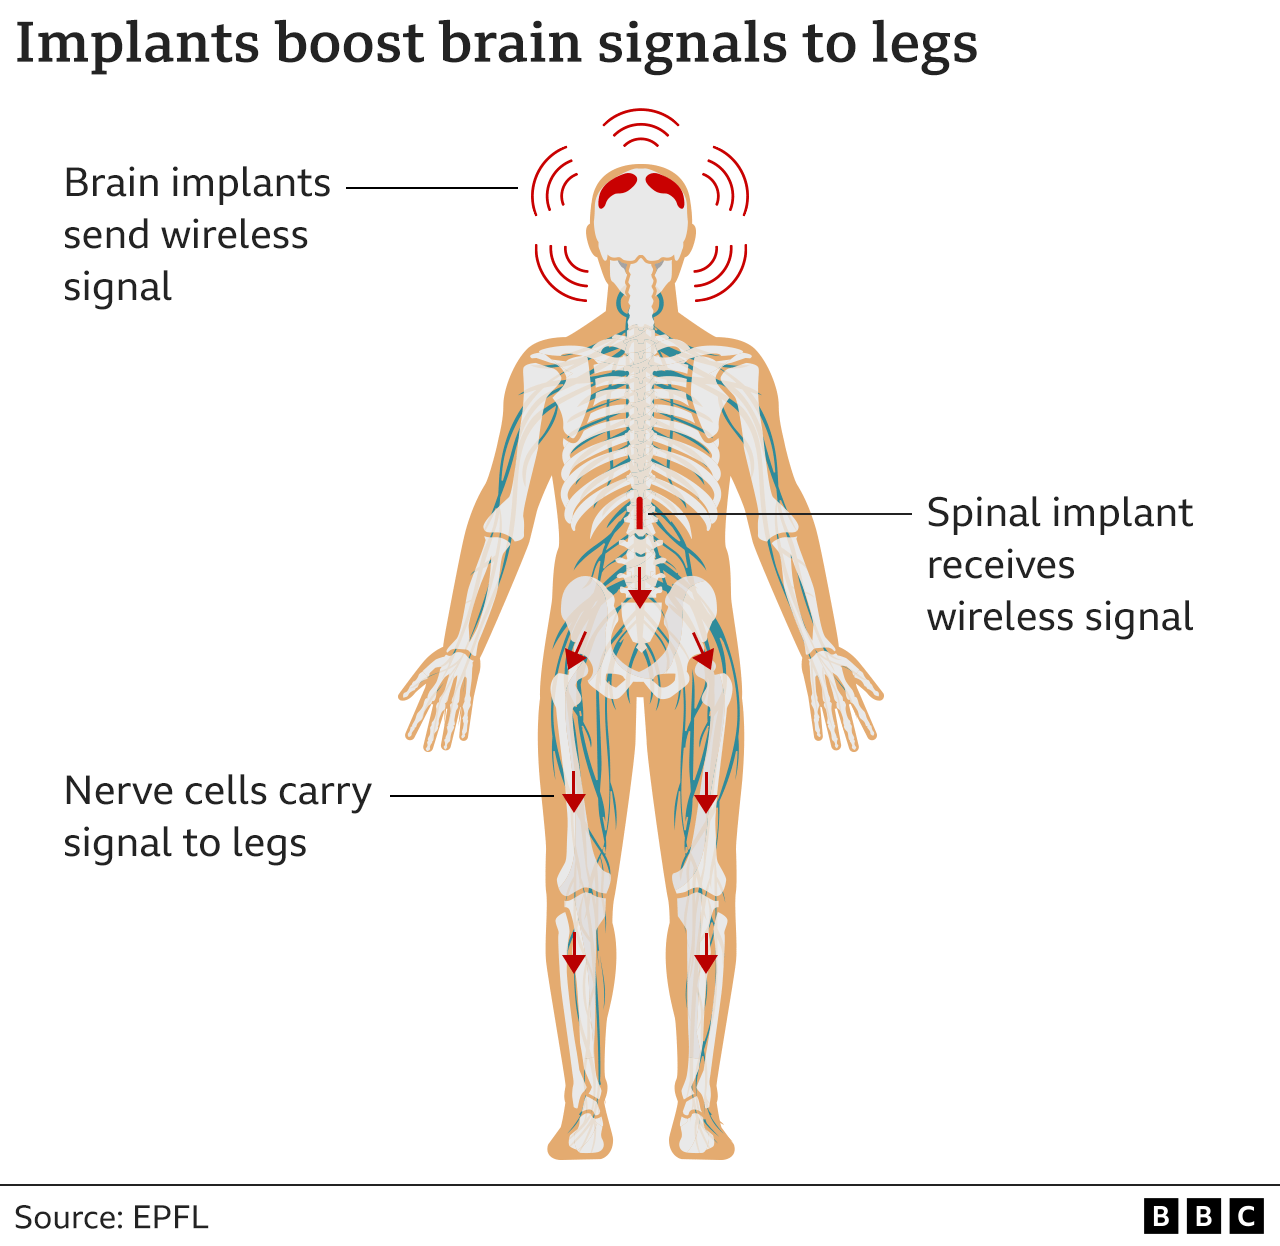 Graphic showing how implants in the brain and spine can help relay a signal to nerve cells in the legs